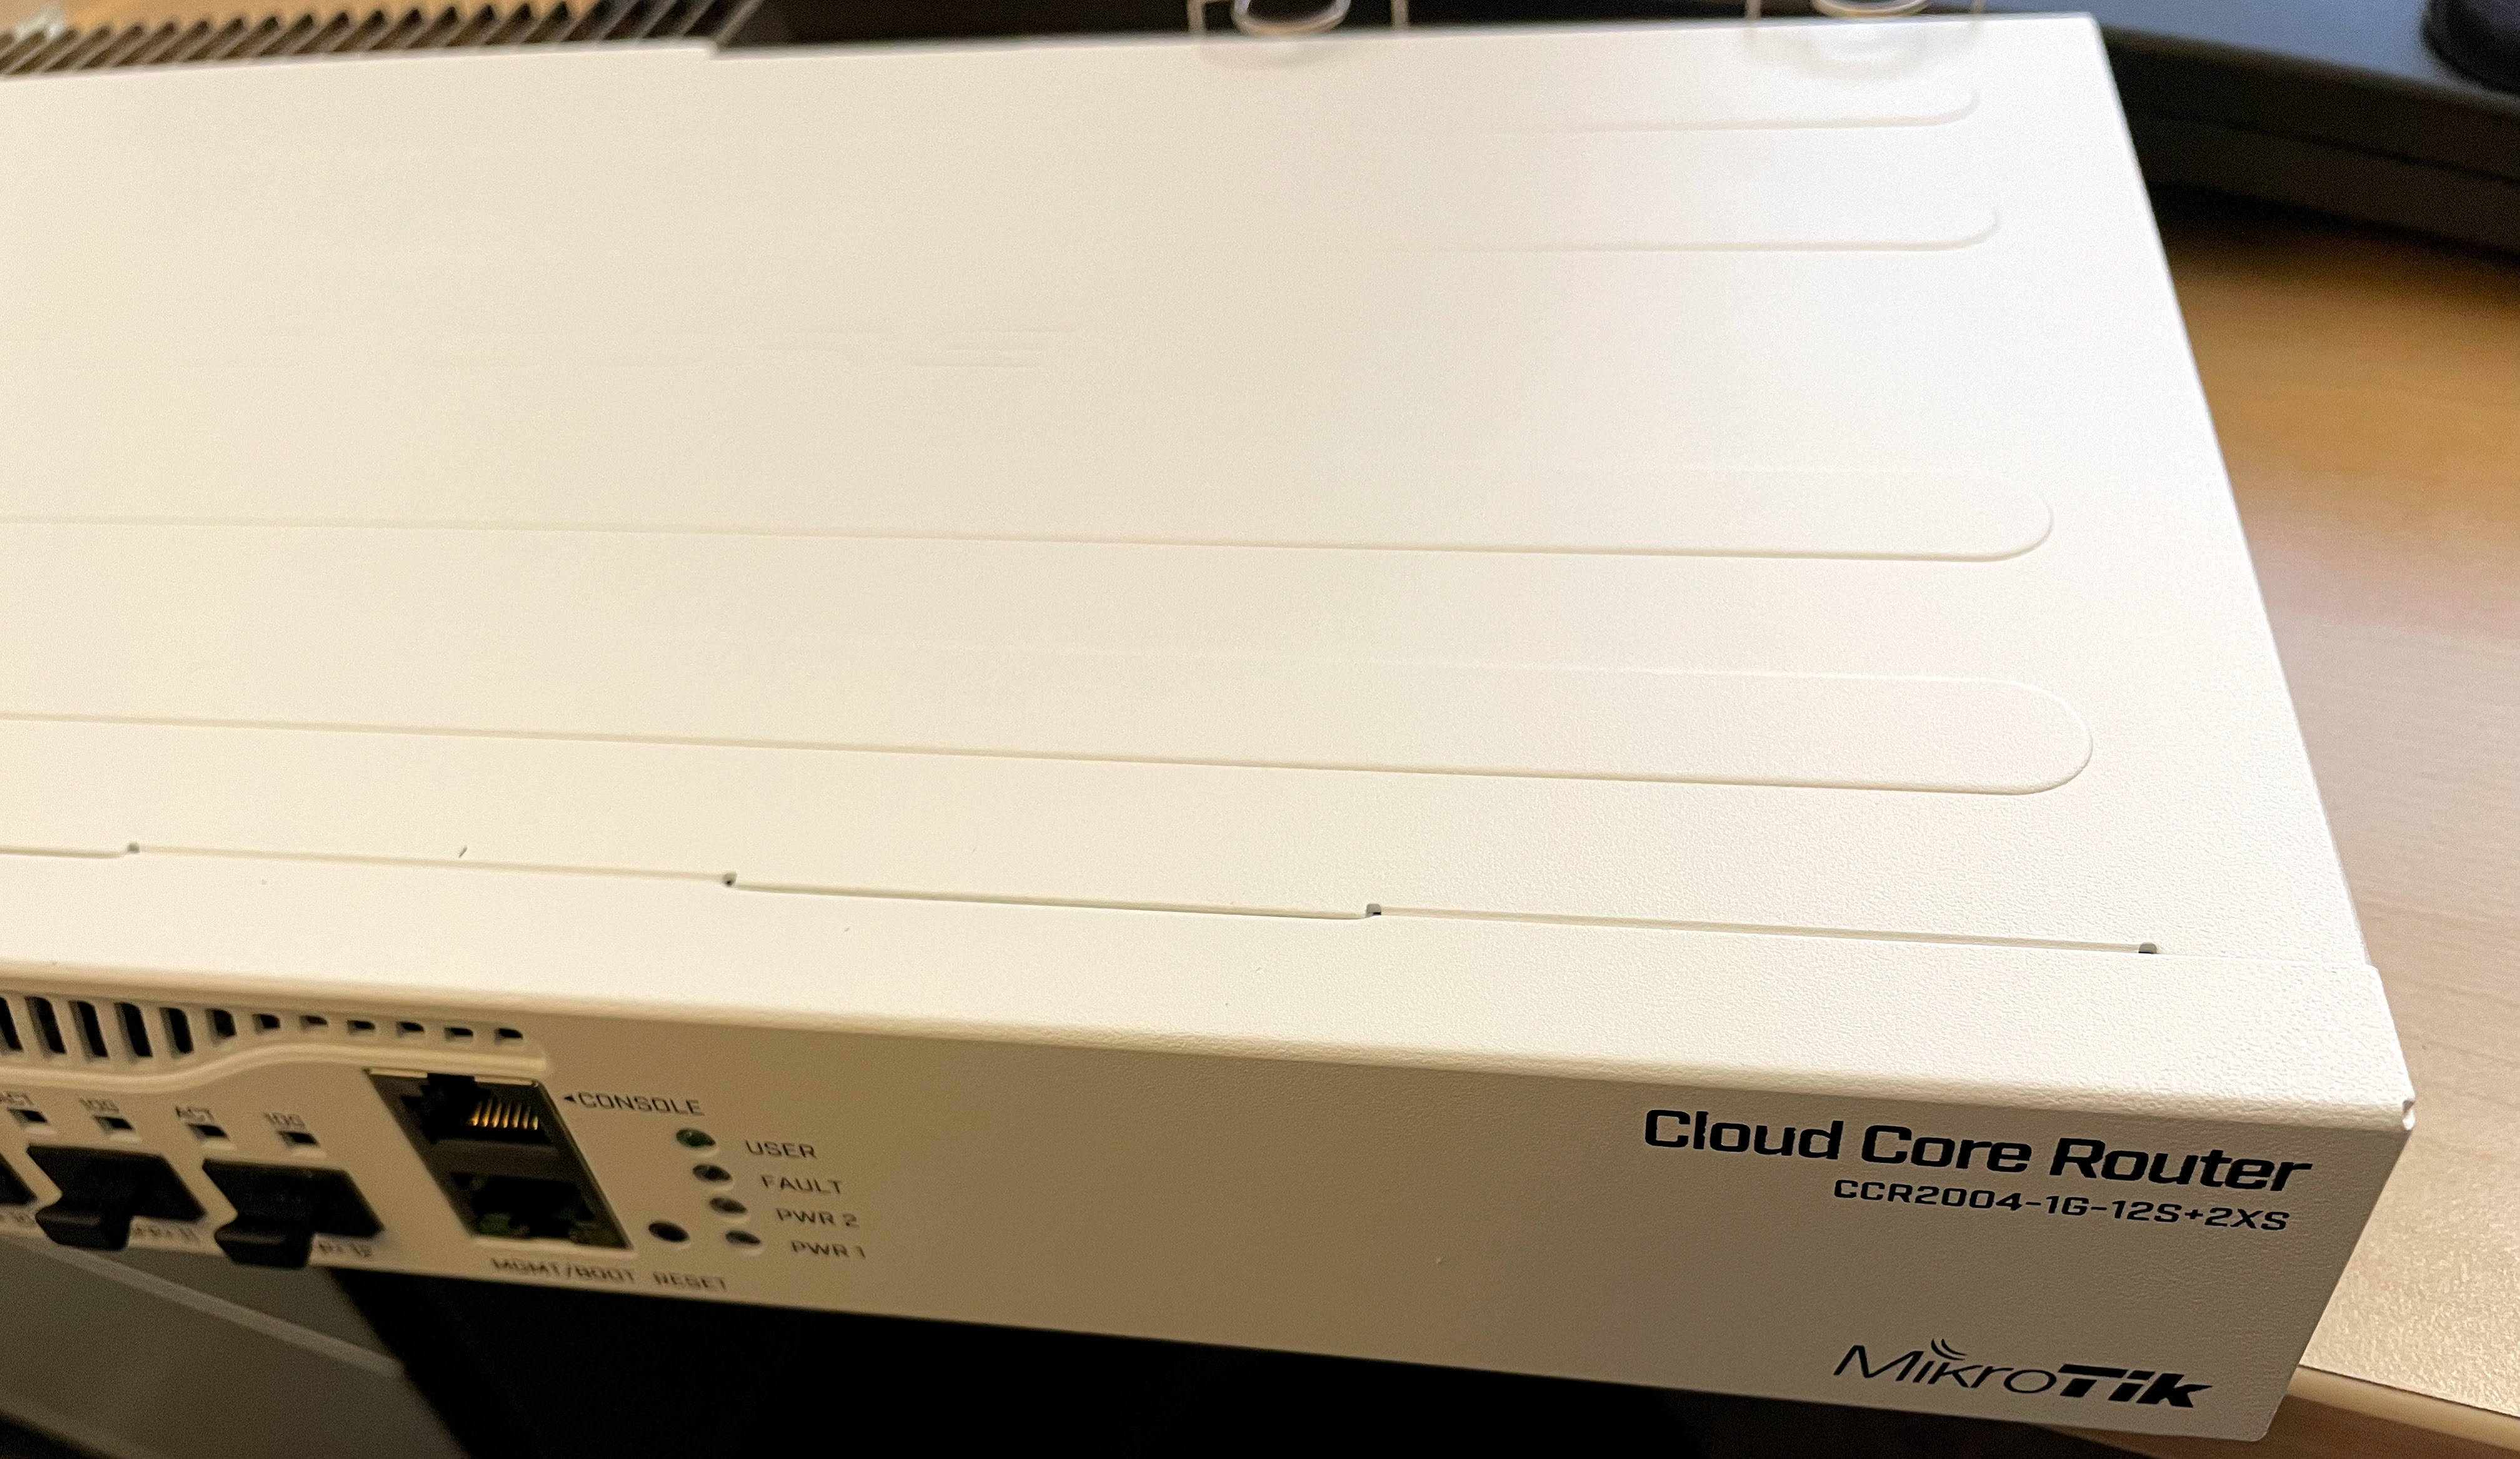 How I configured and then promptly returned a MikroTik CCR2004